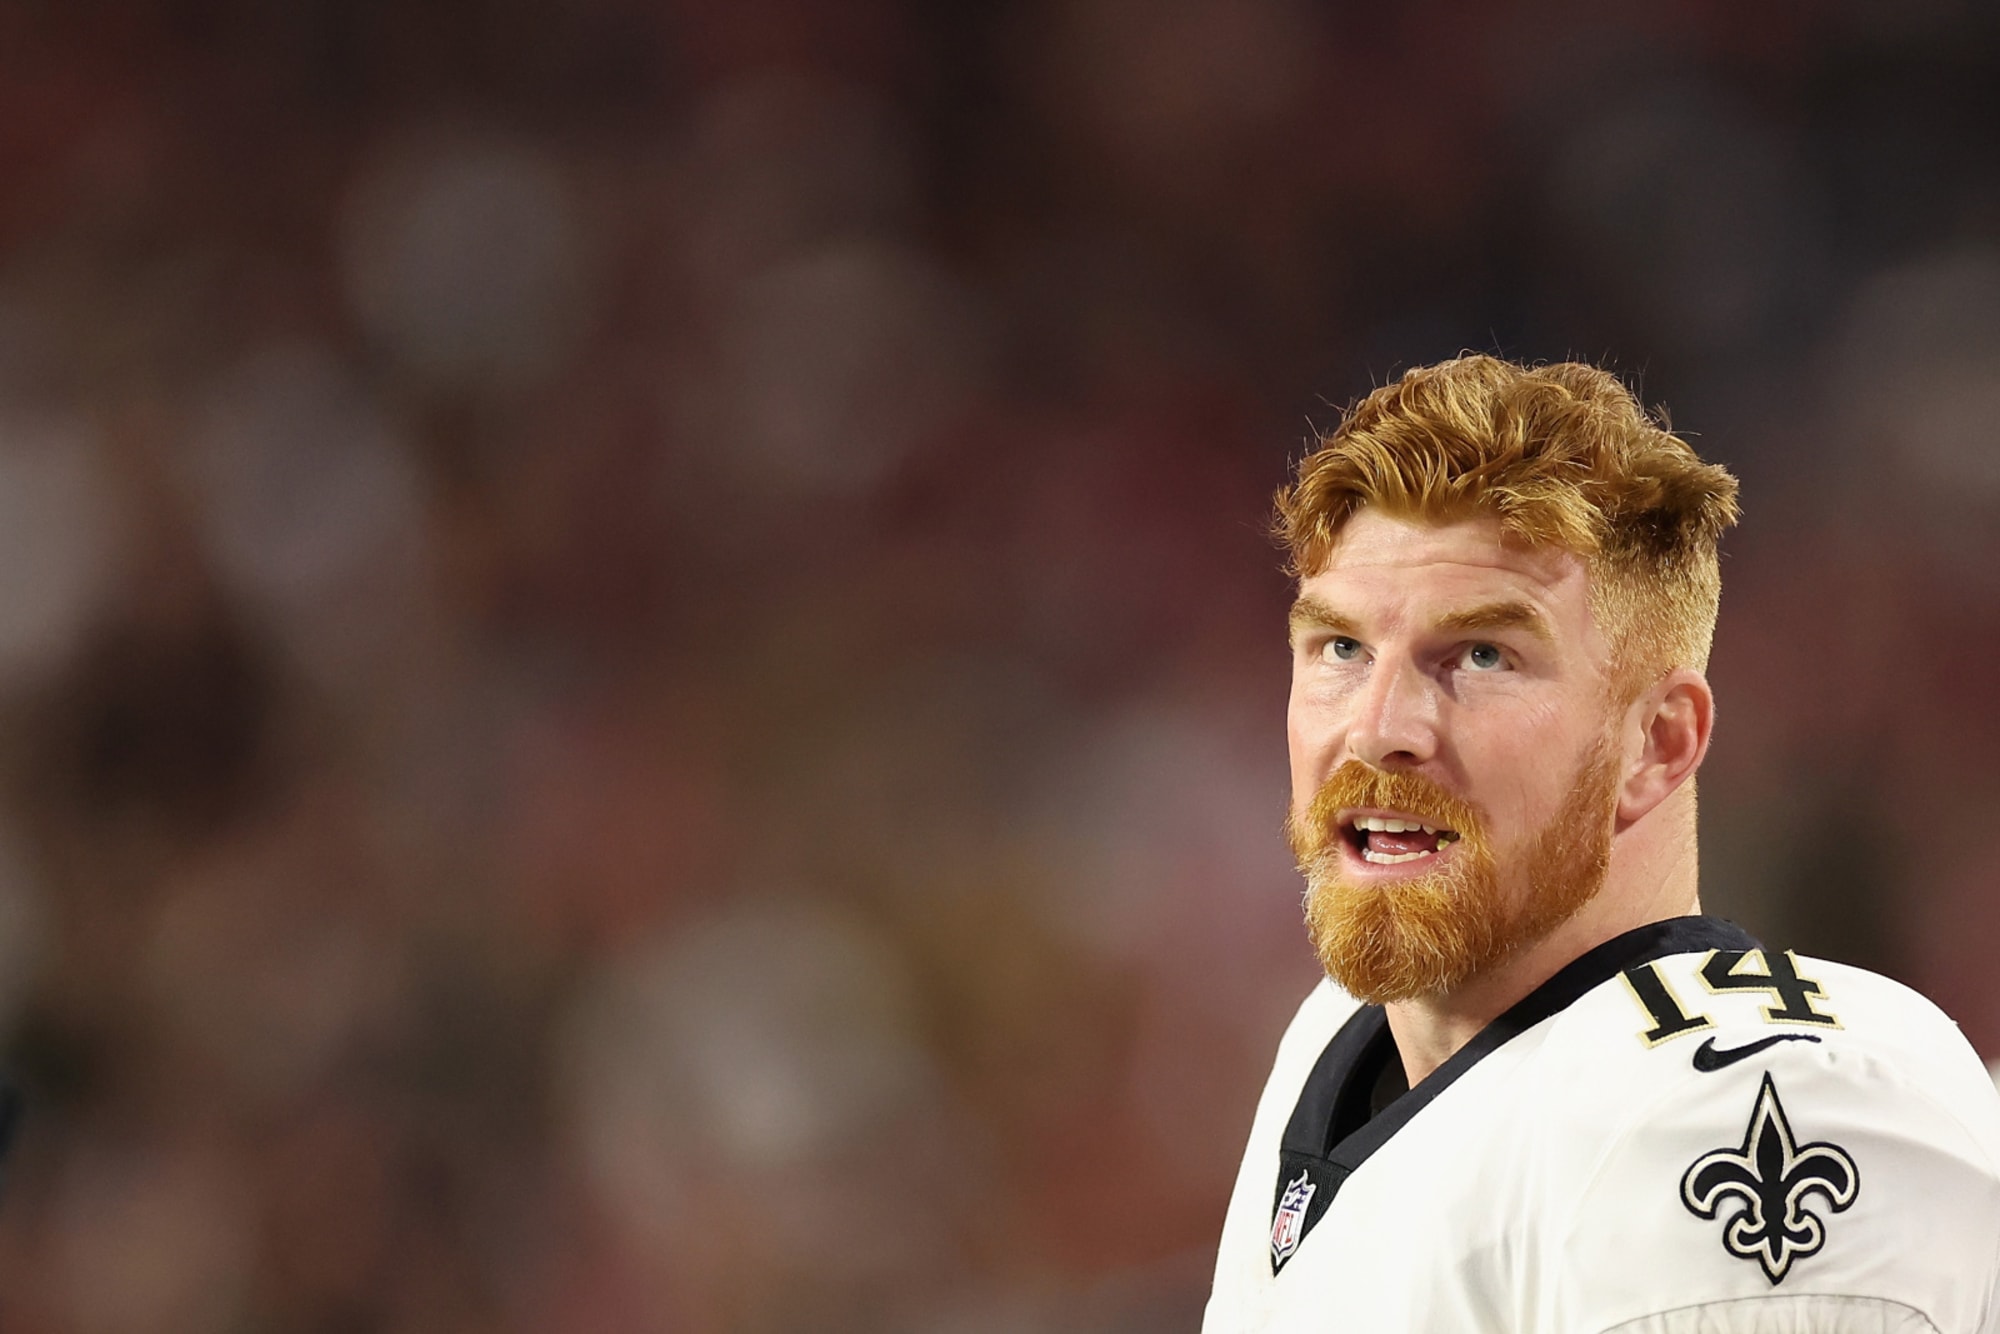 Andy Dalton nominated for weekly award after throwing four interceptions